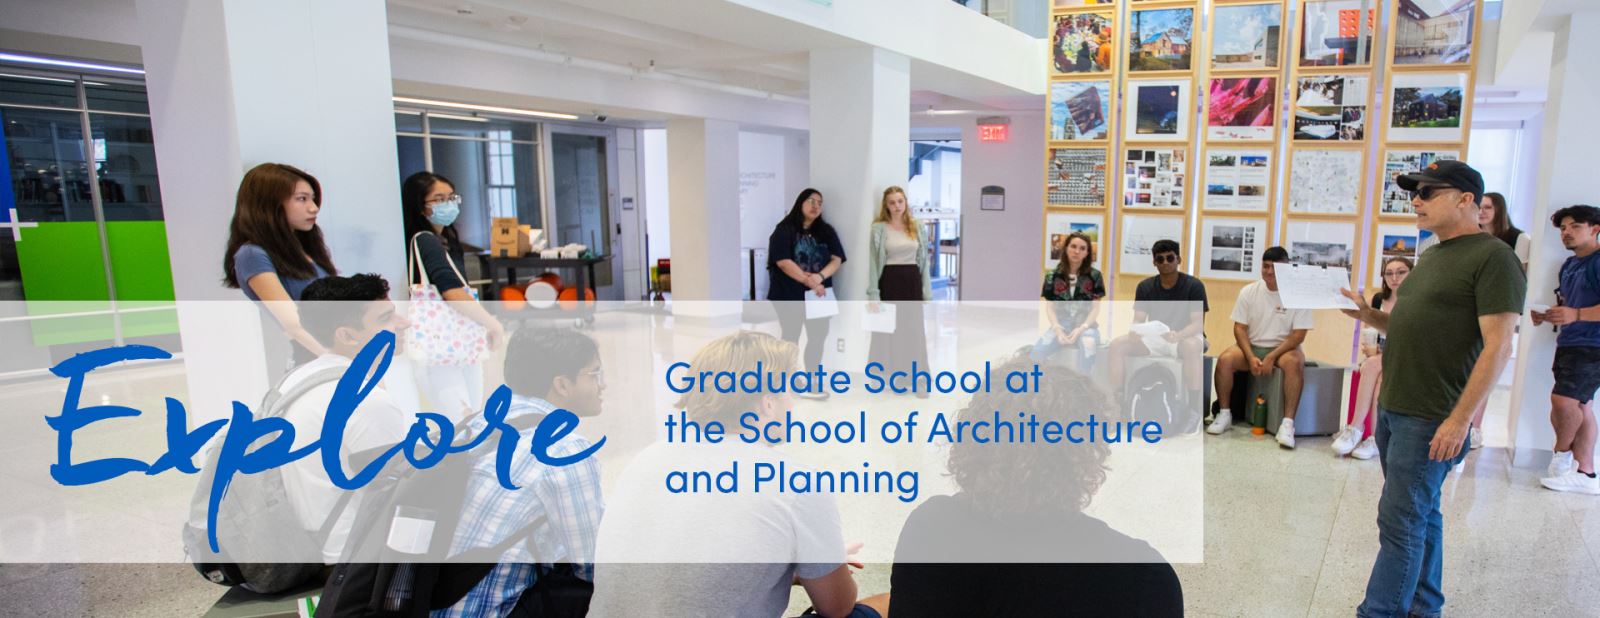 Explore the School of Architecture and Planning